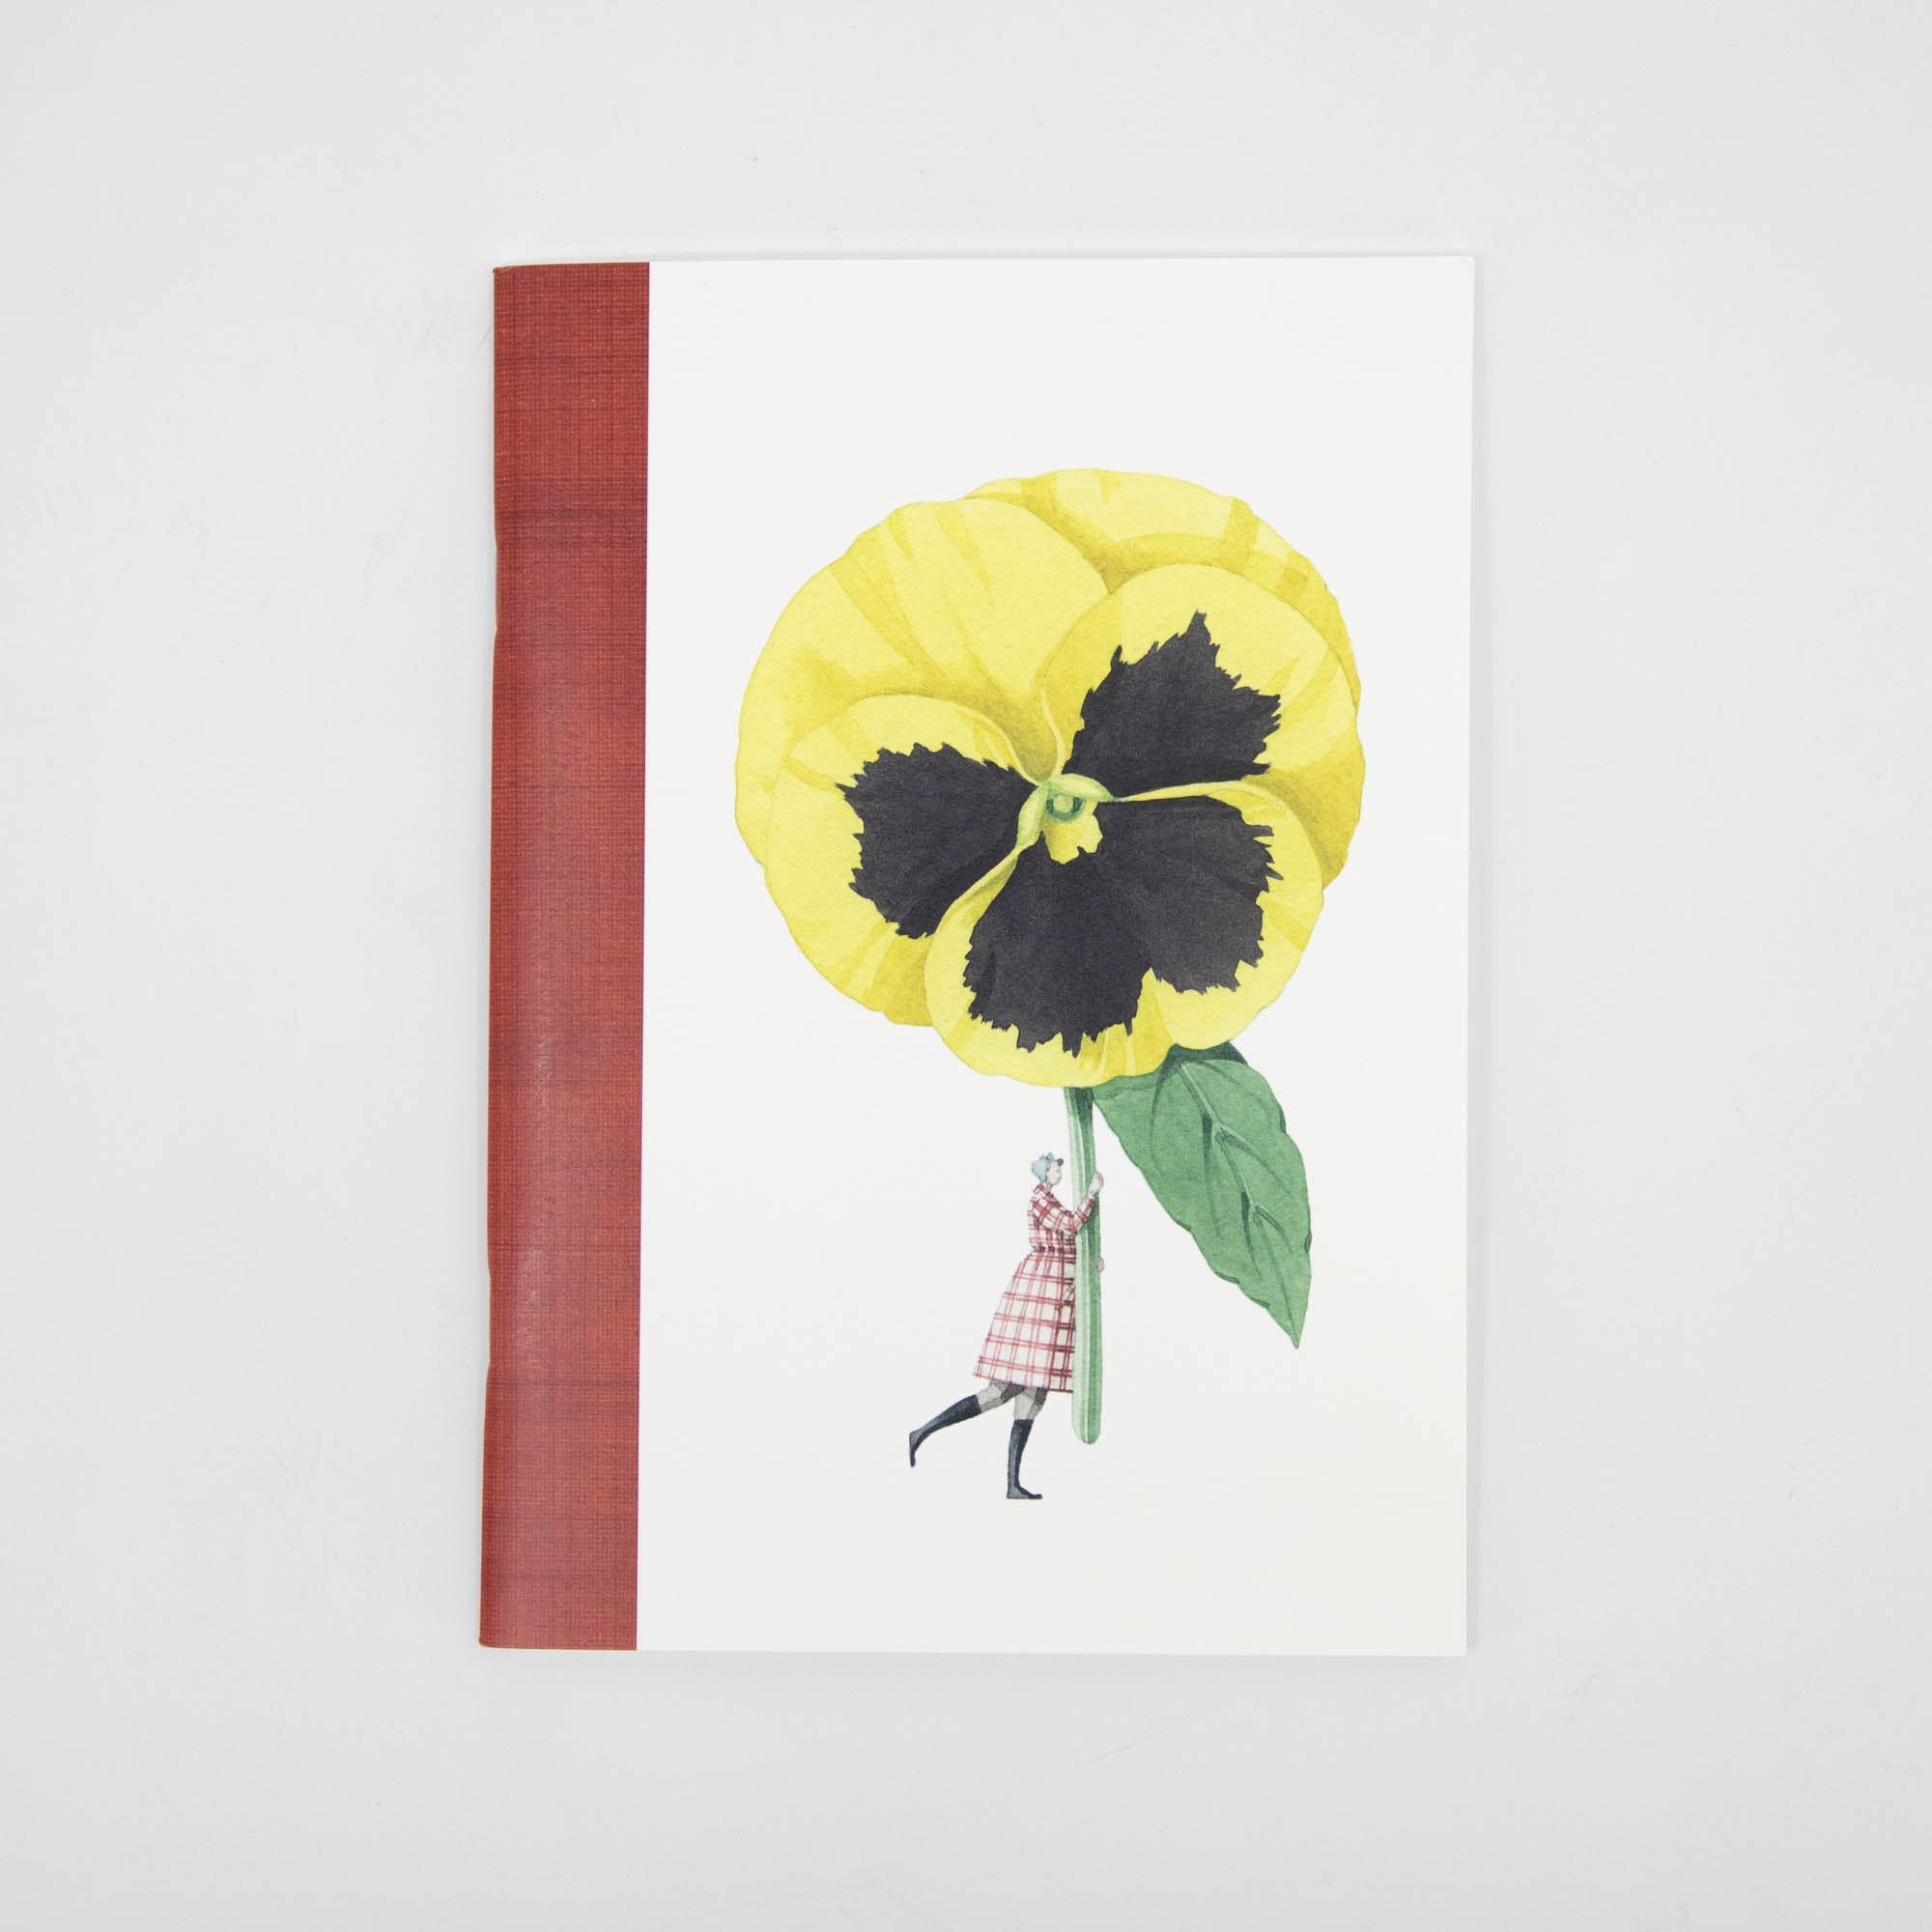 A5 Notebook - In Bloom - Two Styles Available